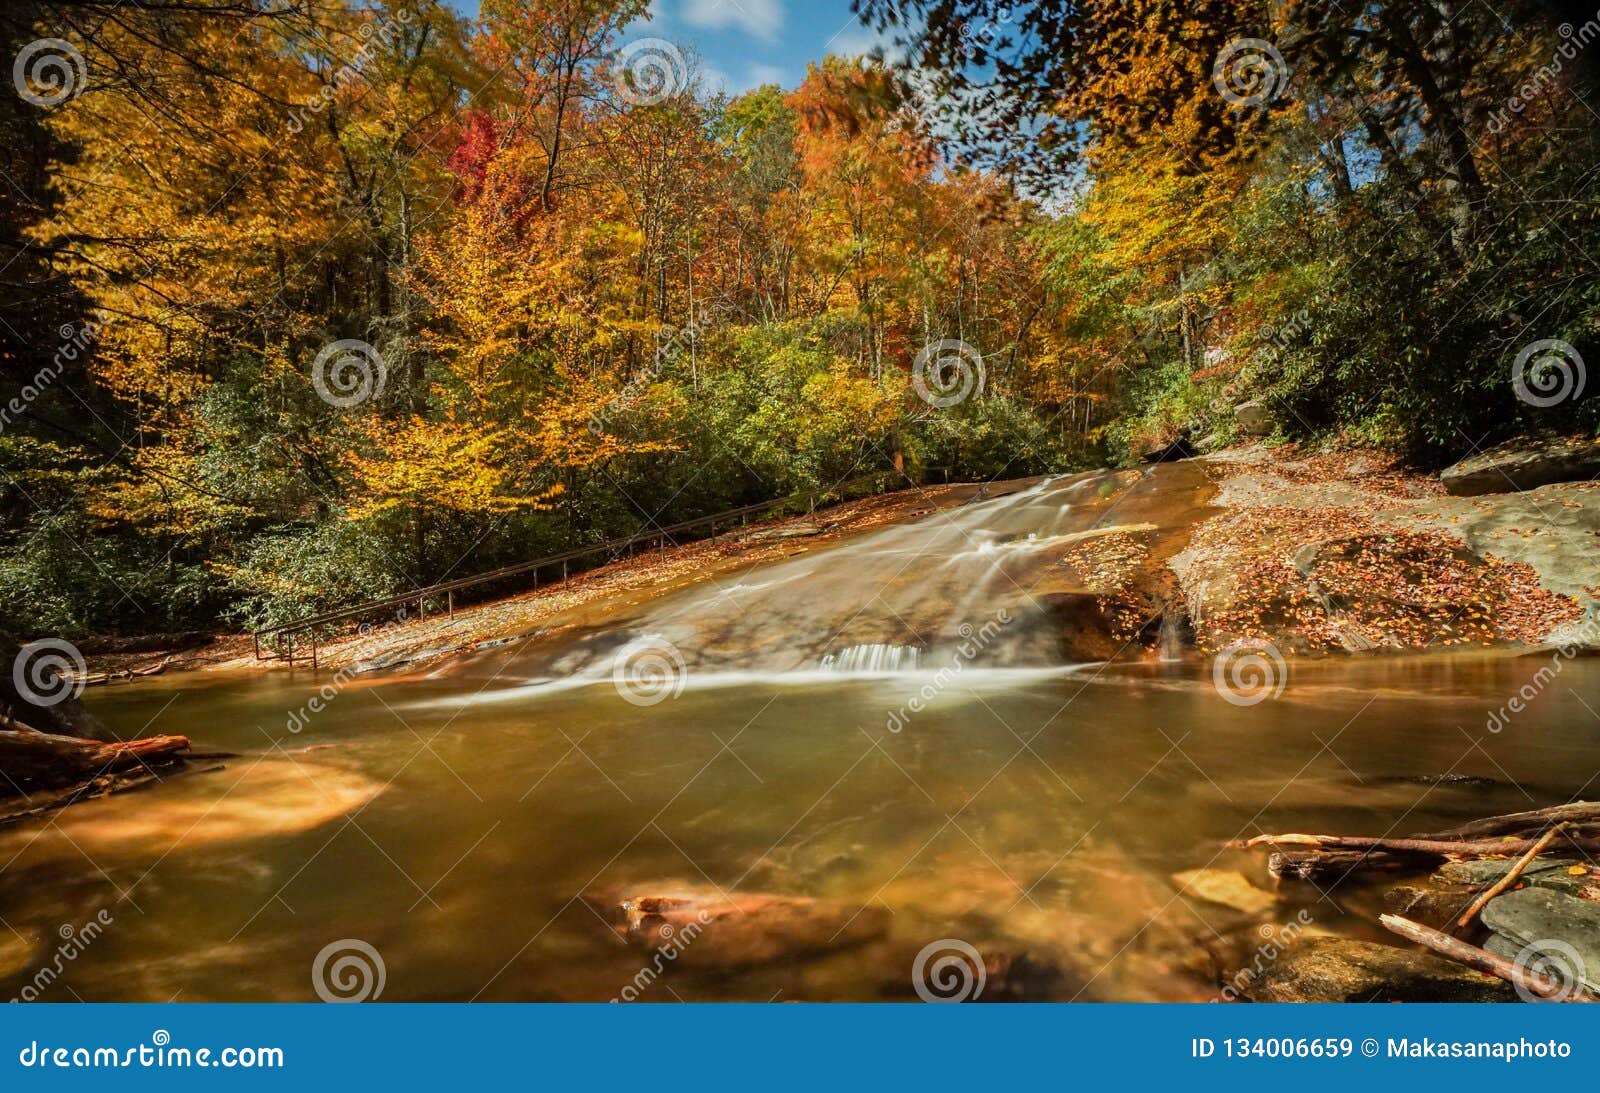 sliding rock falls in the appalachians of north carolina in late autumn with fall color foliage